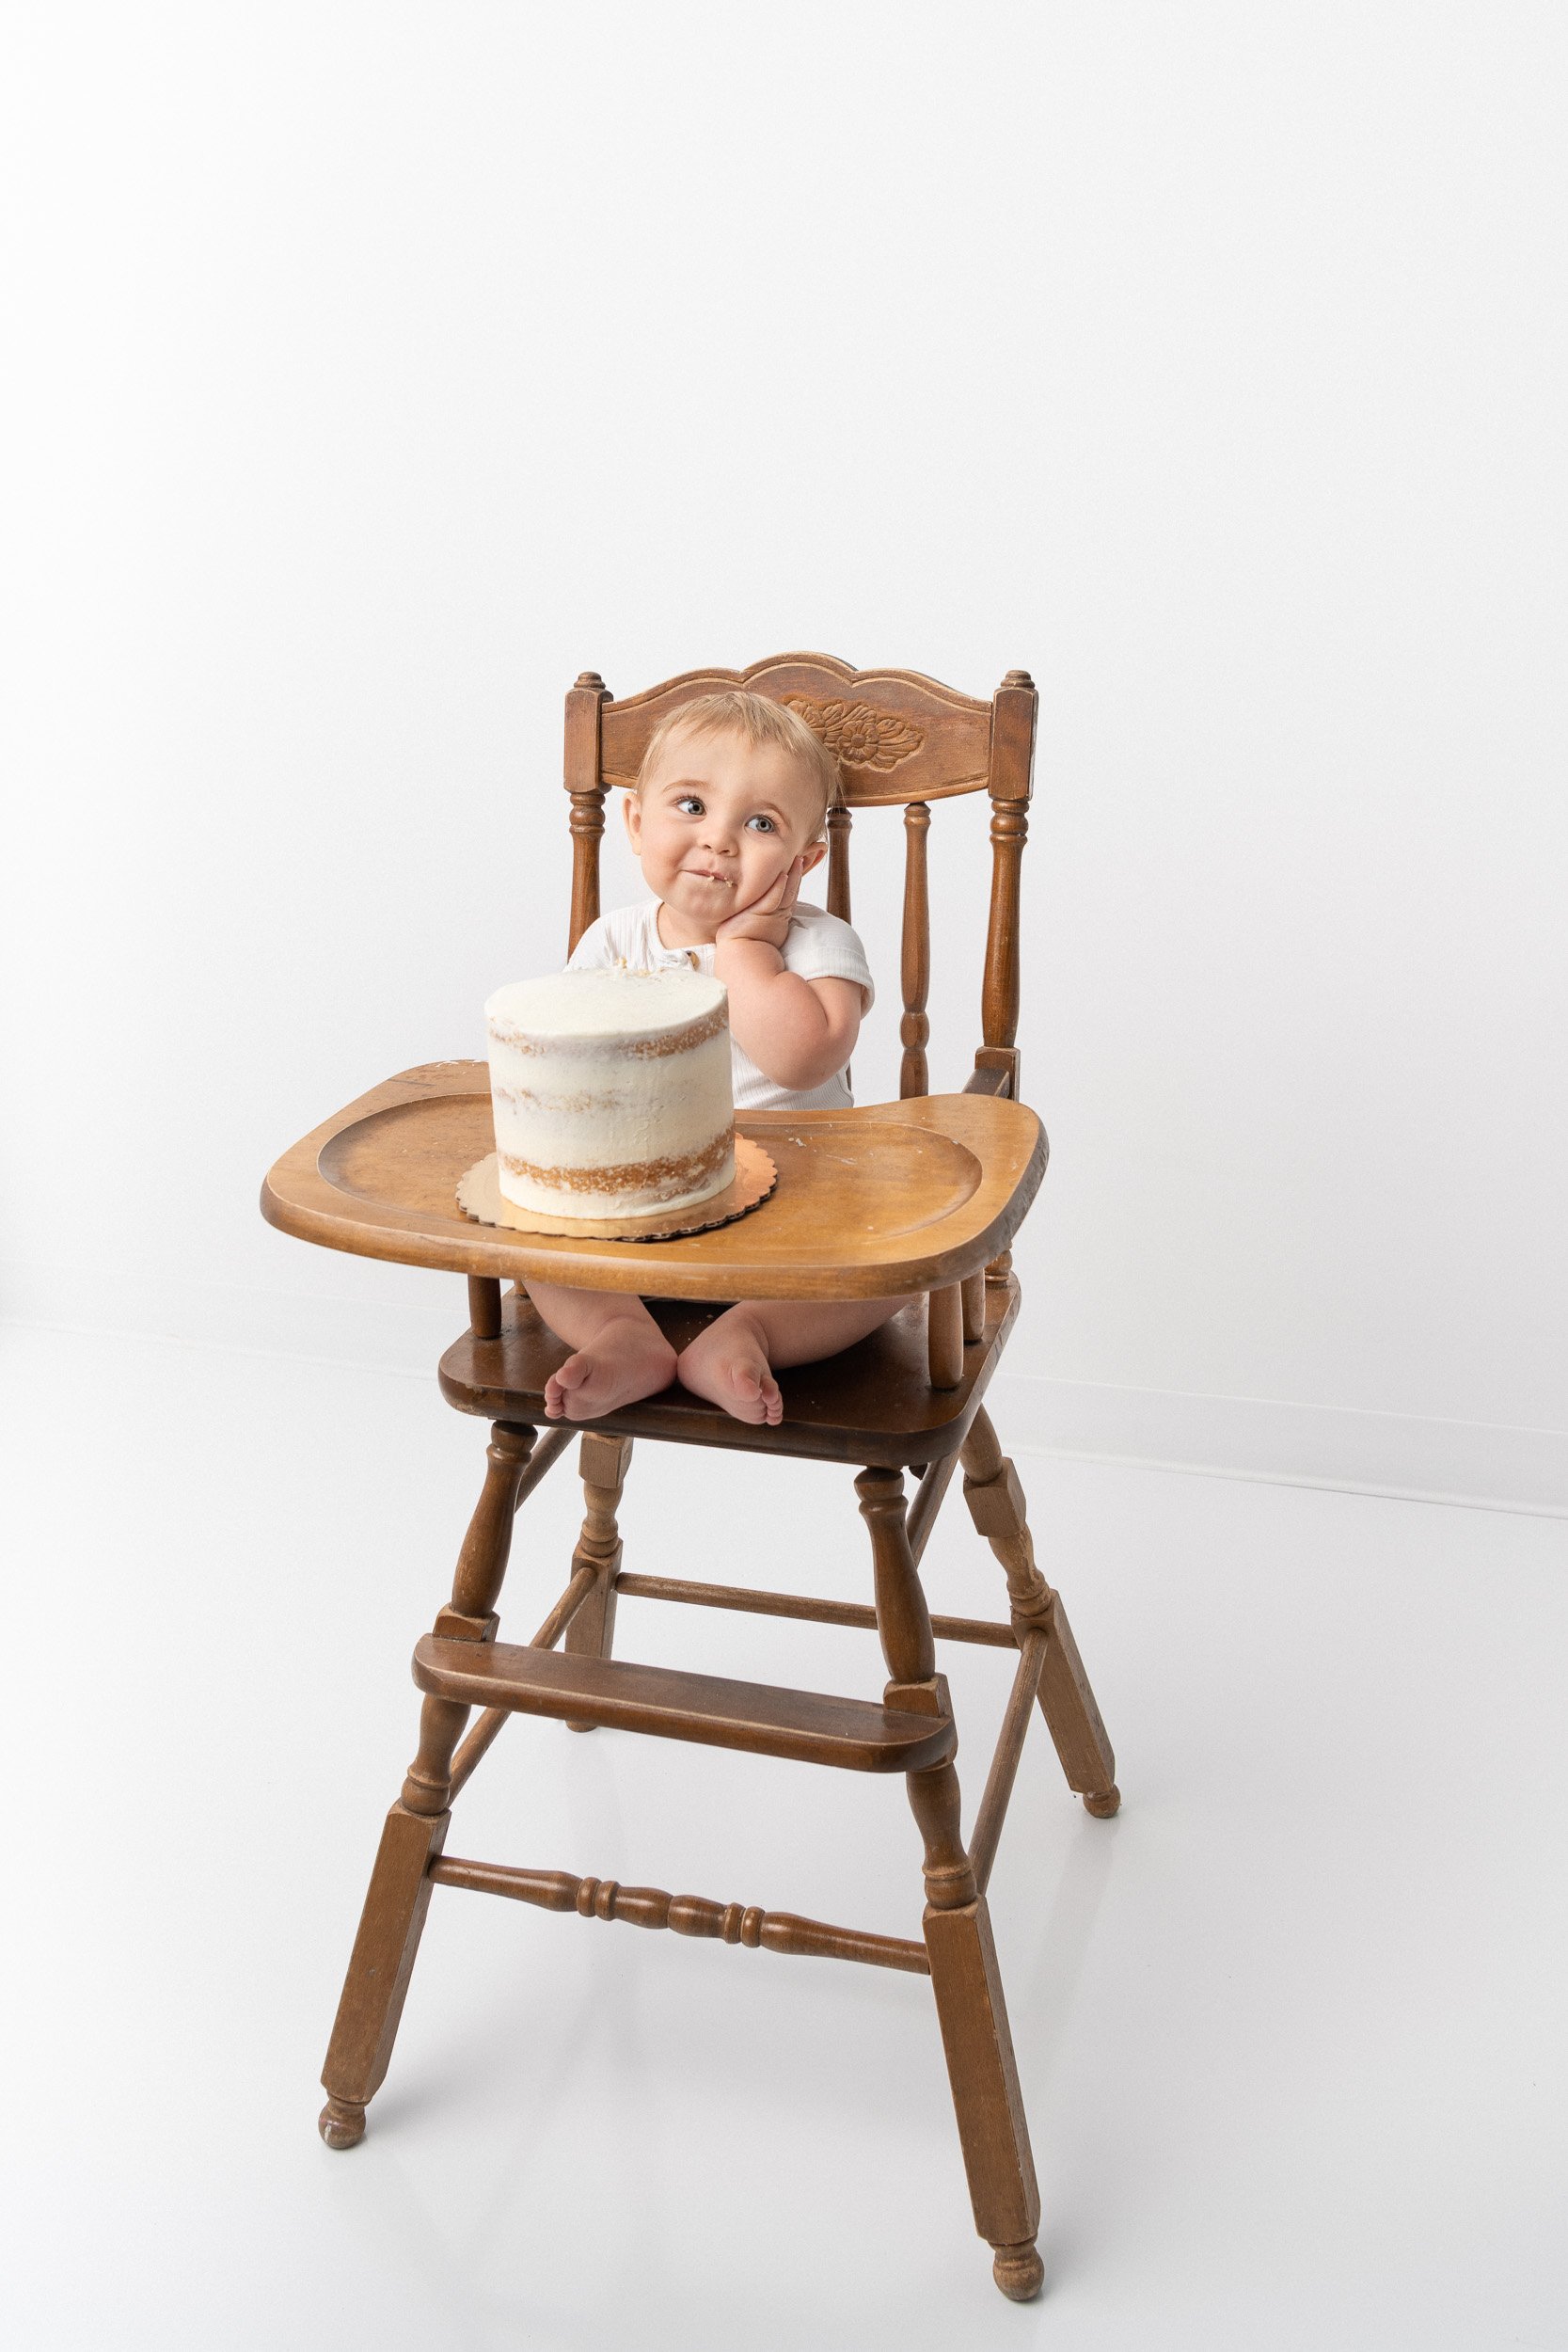  First birthday photo with a baby in an antique high chair by Nicole Hawkins Photography. antique high chair smash cake #NicoleHawkinsPhotography #NicoleHawkinsBabies #BirthdayStudioPhotography #smashcake #firstbirthday #studiobabiesandchildren 